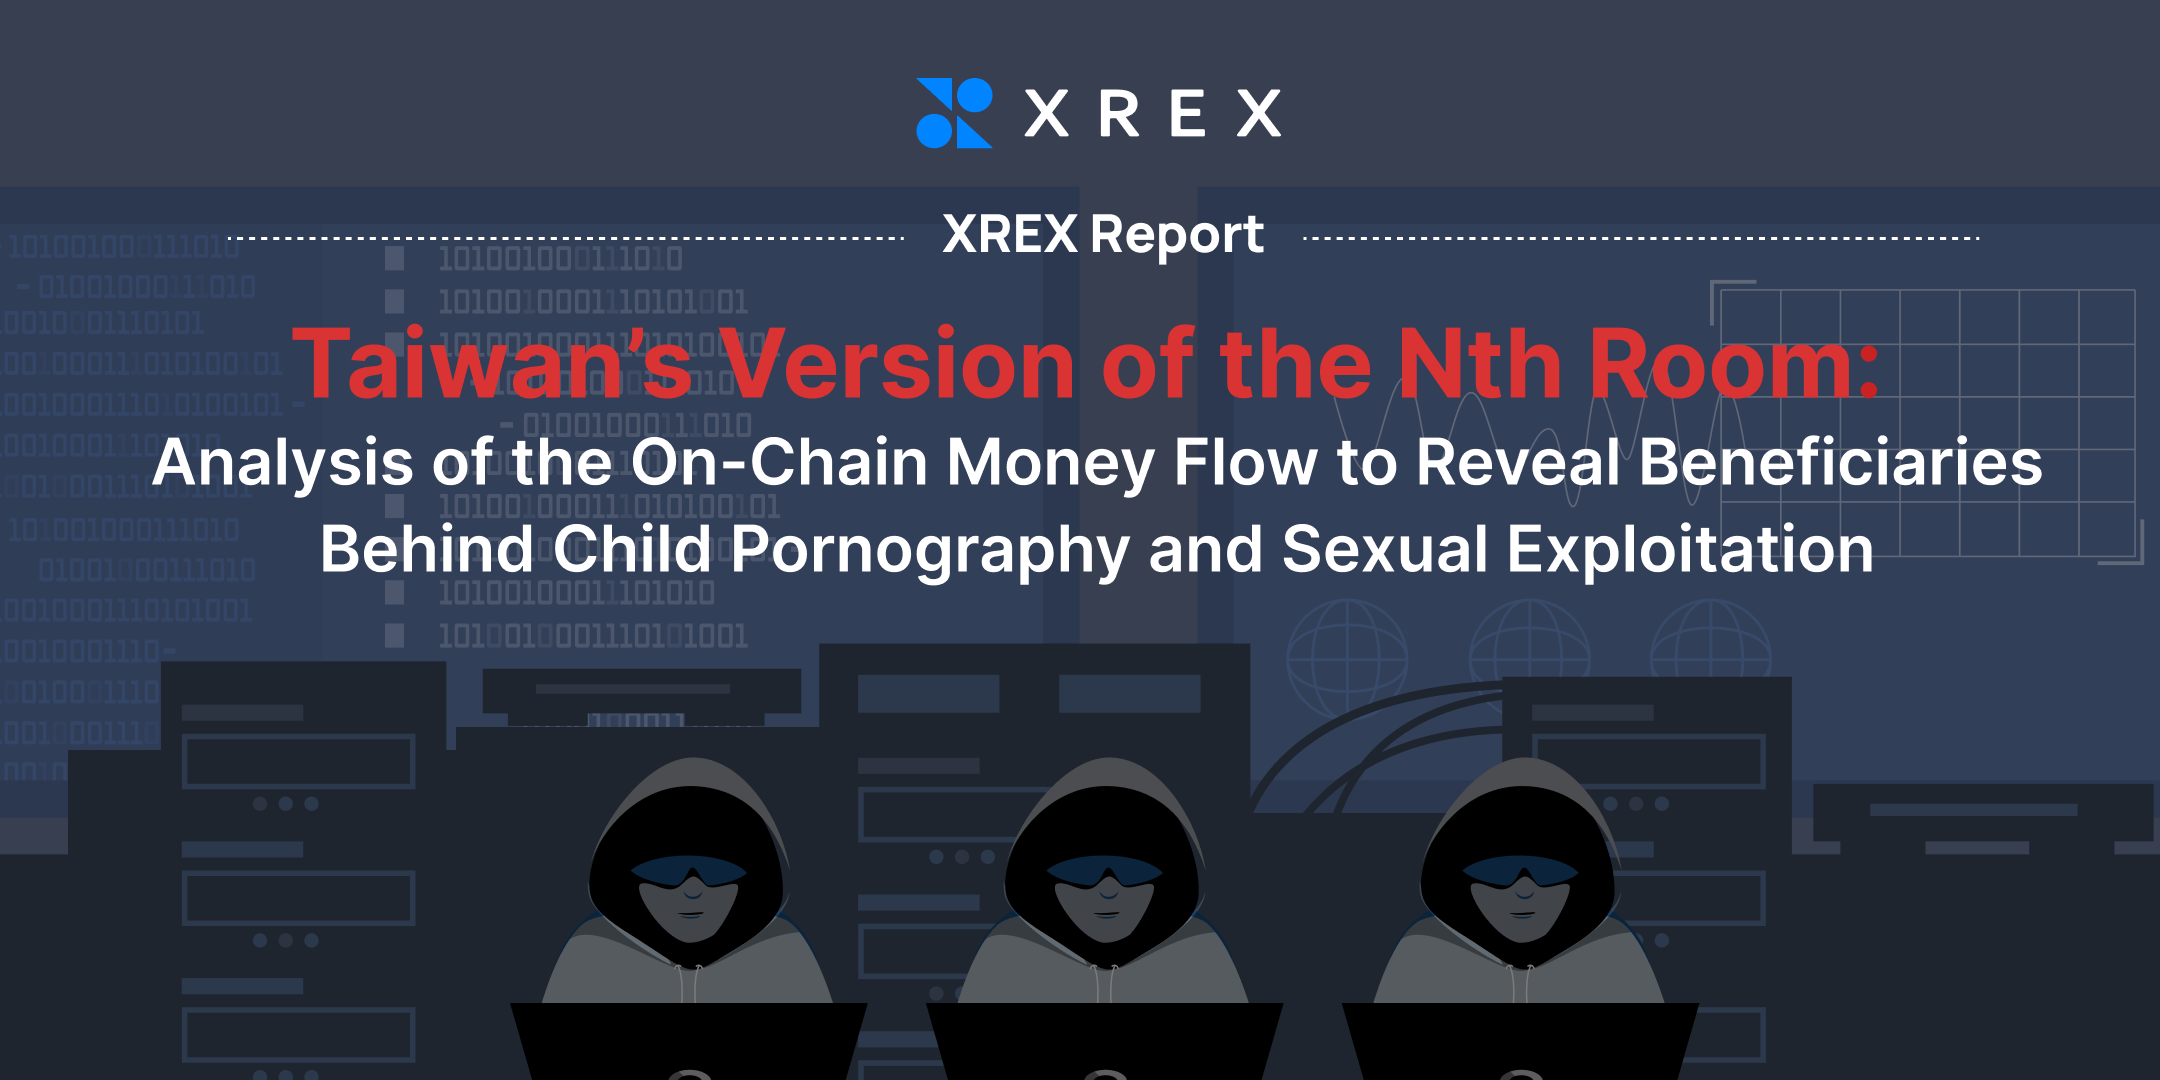 XREX Report | Taiwan’s Version of the Nth Room: Analysis of the On-Chain Money Flow to Reveal Beneficiaries Behind Child Pornography and Sexual Exploitation